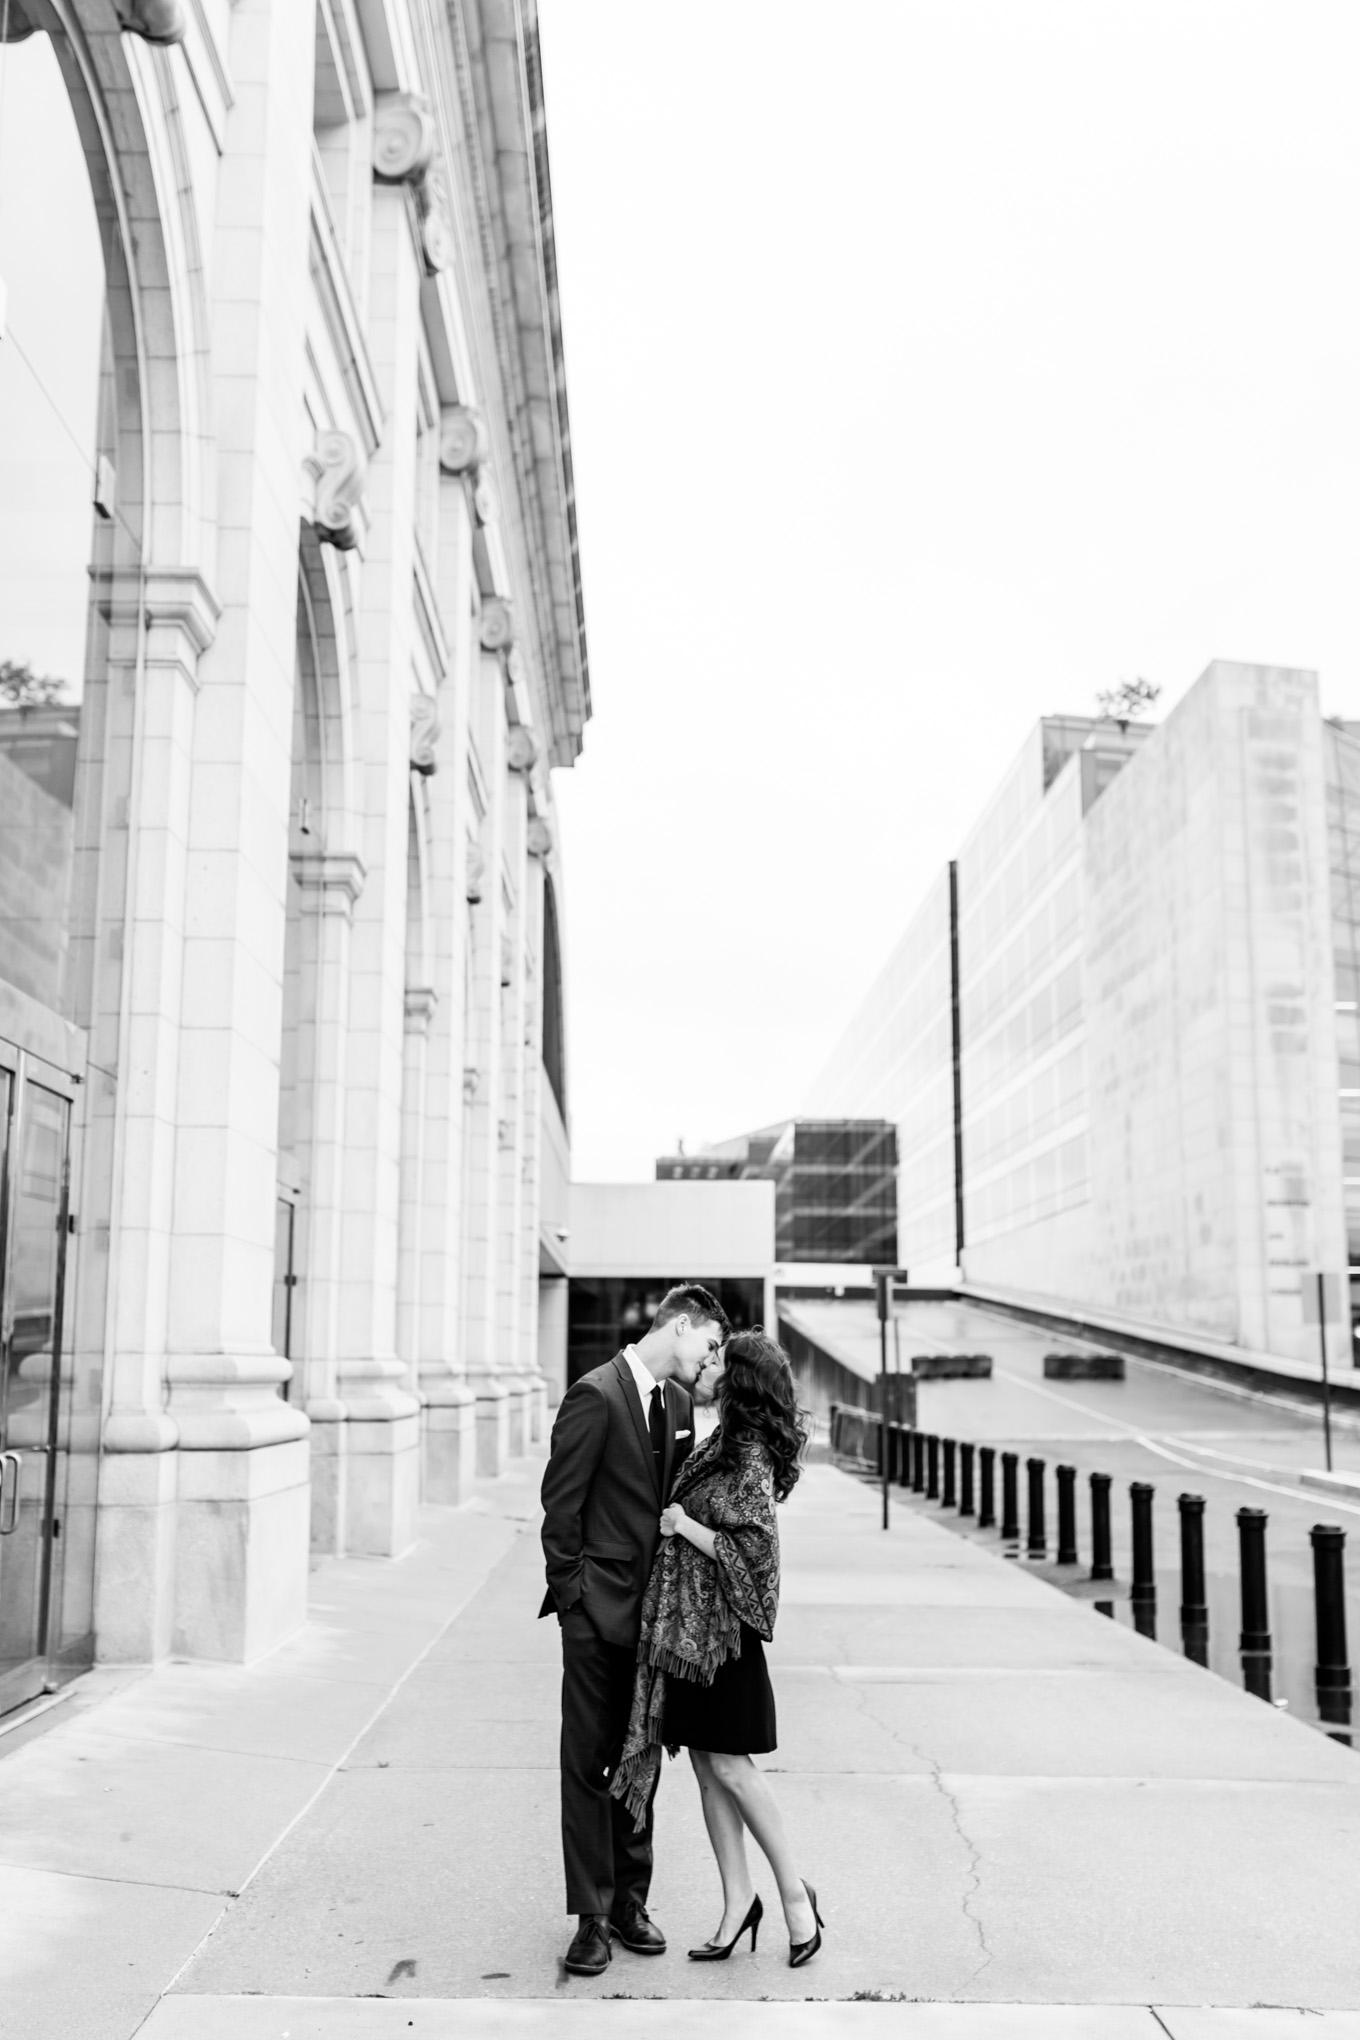 black and white engagement photos, black and white photography, black and white photos, engagement photos, black and white D.C., D.C. engagement photos, classic engagement photos, traditional engagement photos, engagement photos poses, classic architecture, D.C. architecture, Union Station D.C., Union Station, engaged couple, relationship goals, joyful couple, black and white sessions, couple kissing